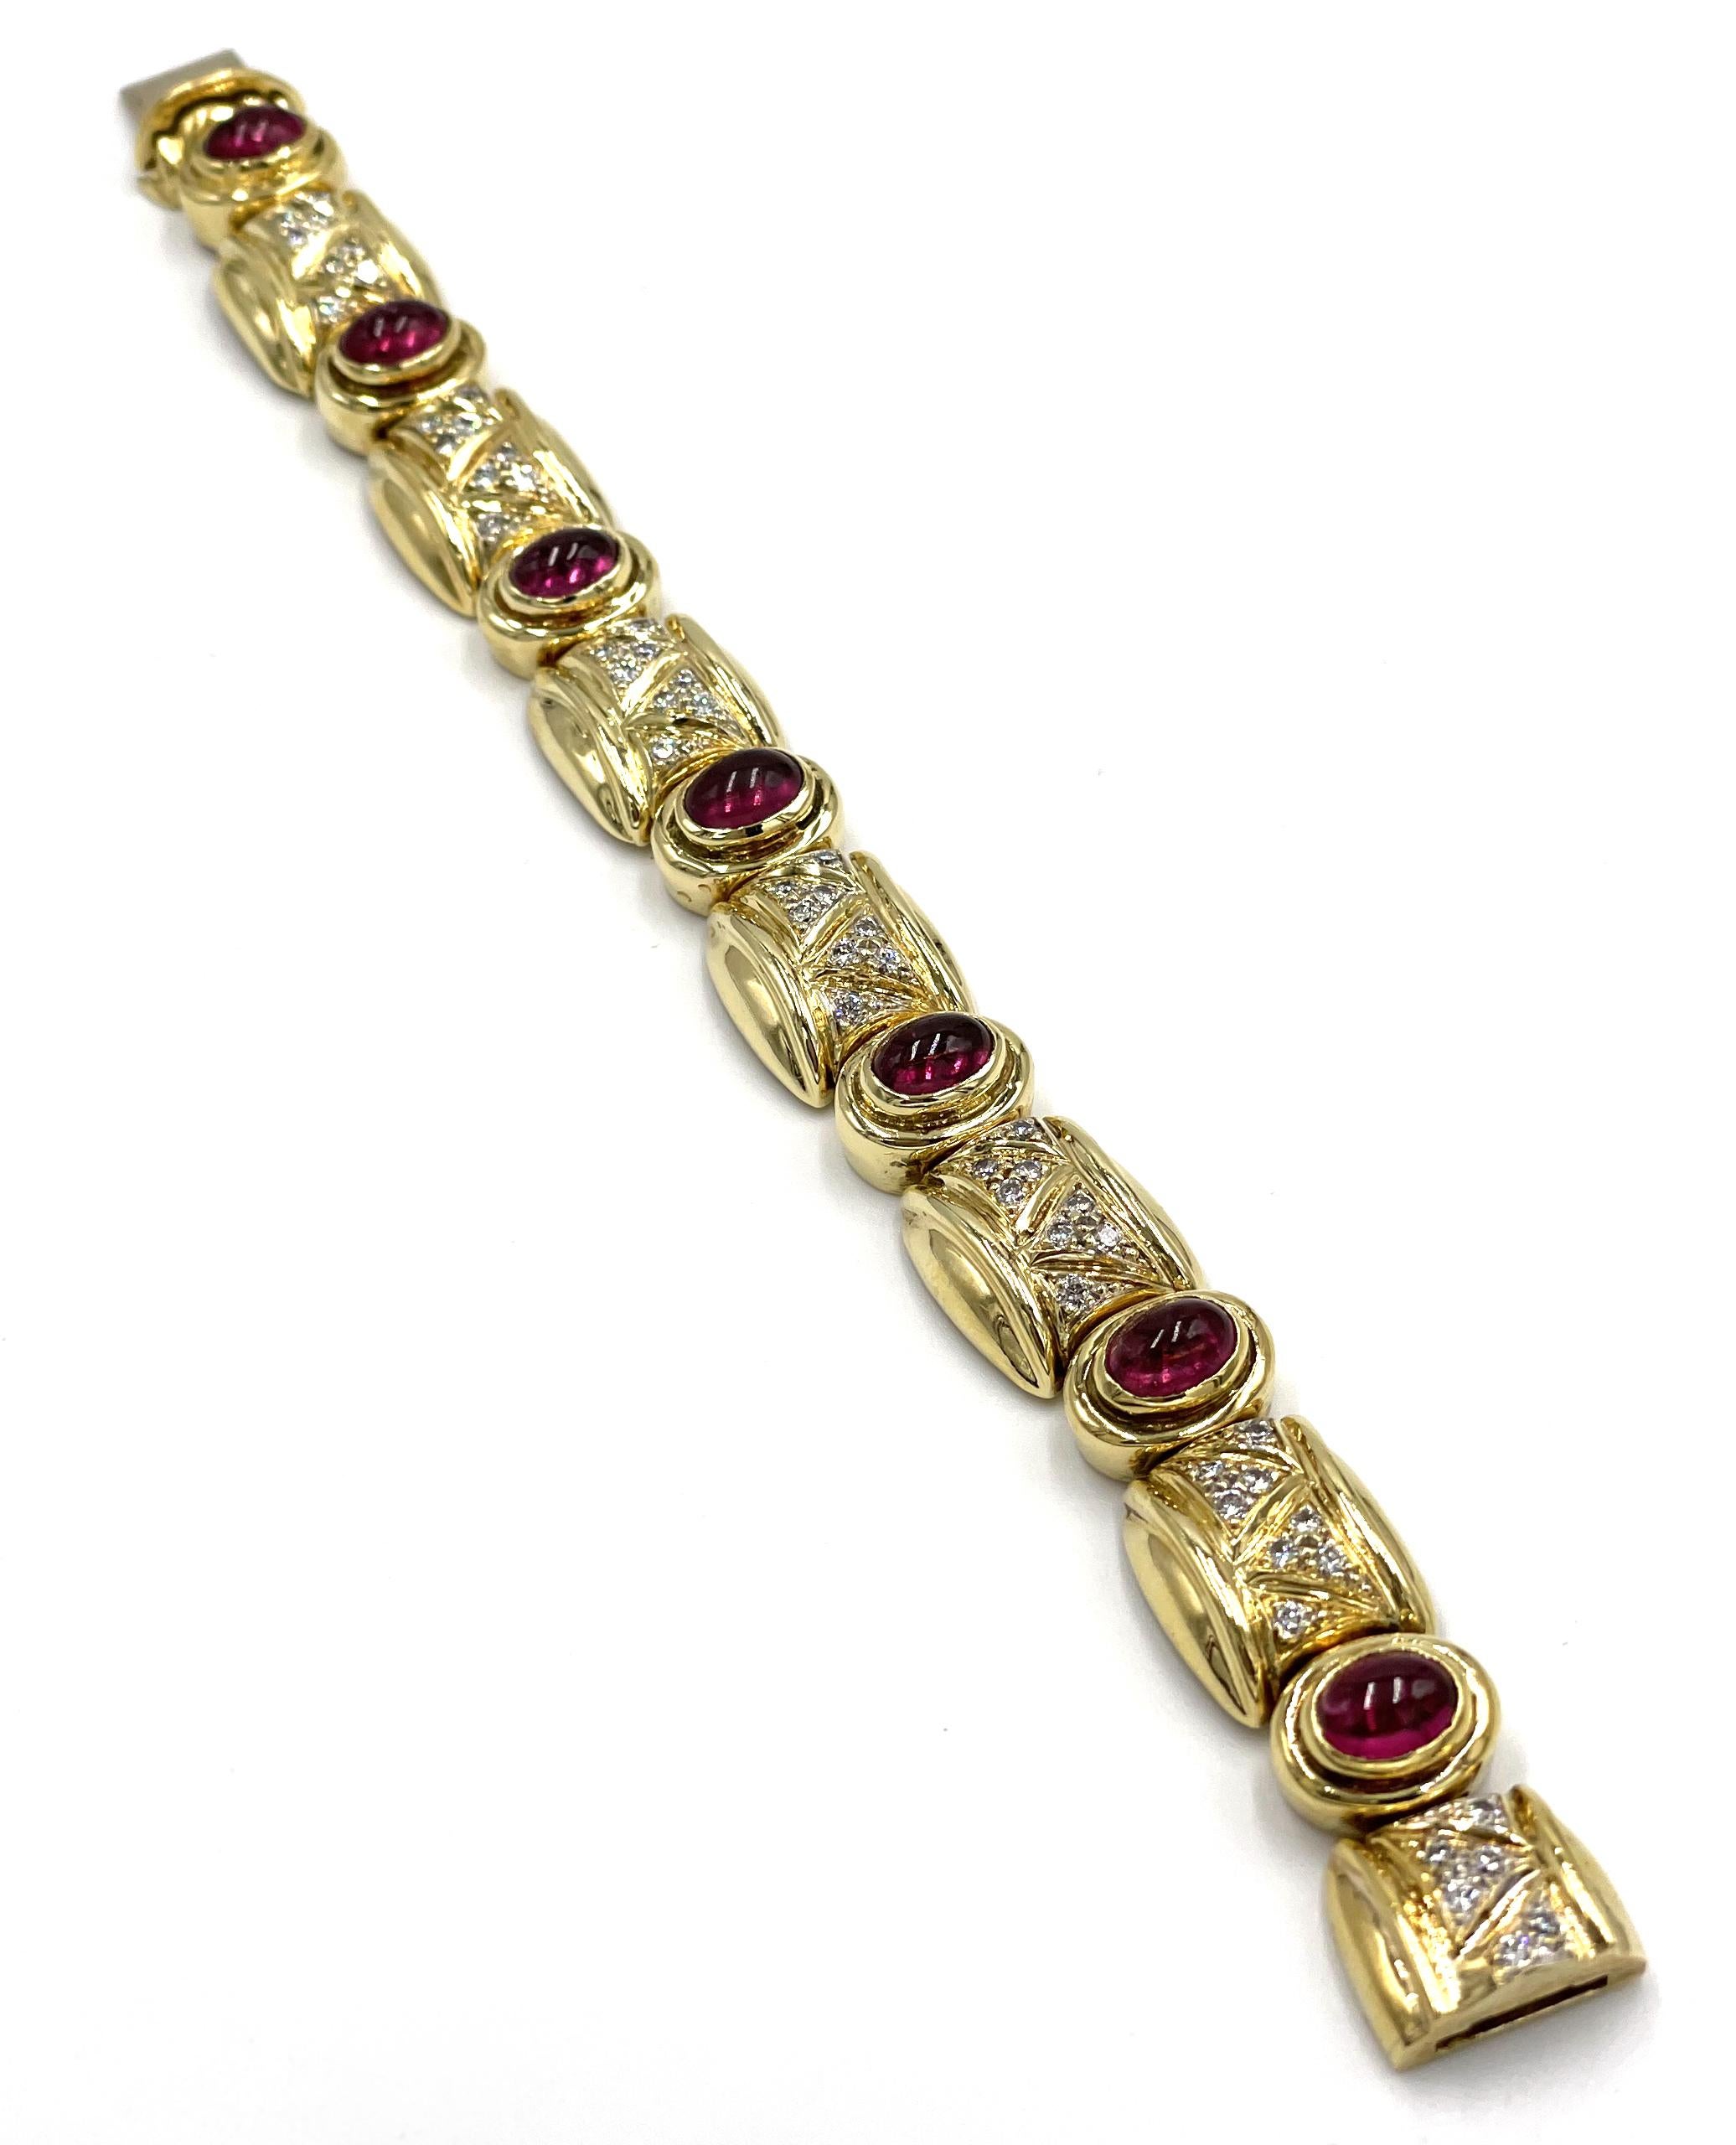 Vintage 18K yellow gold bracelet with 55 round diamonds totaling 1.52 carats (G color, VS clarity) and with 7 oval cabochon-cut pink tourmalines which are 5X7 millimeters each. Bracelet length is approximately 6.5 inches and the bracelet width is